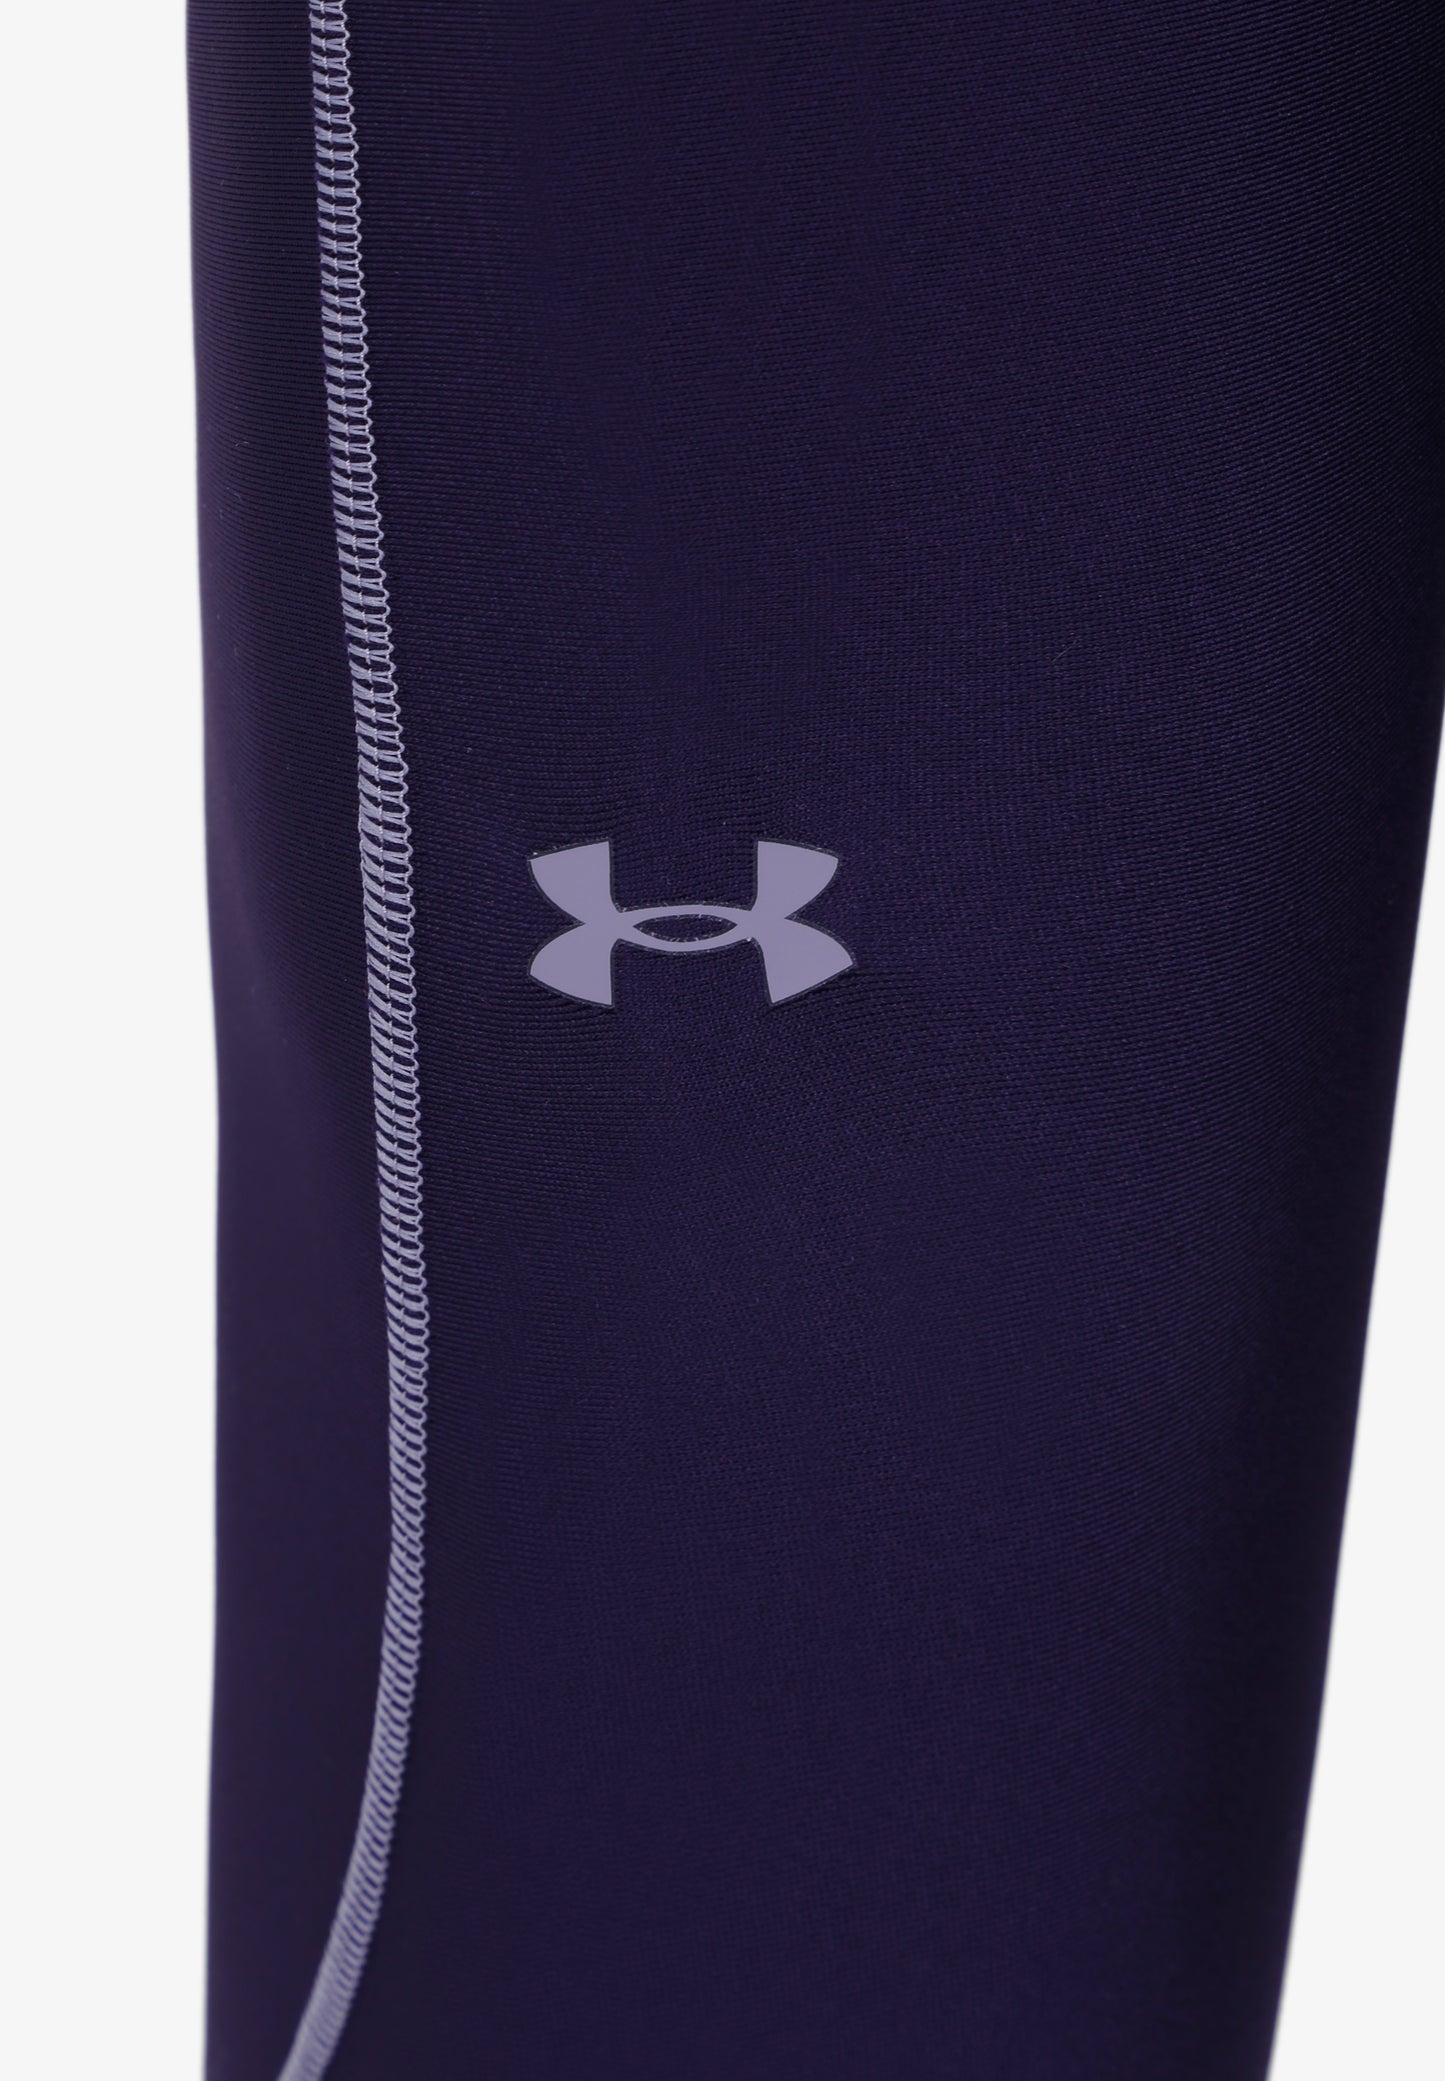 UNDER ARMOUR | LEGGINGS ANKLE SOLID